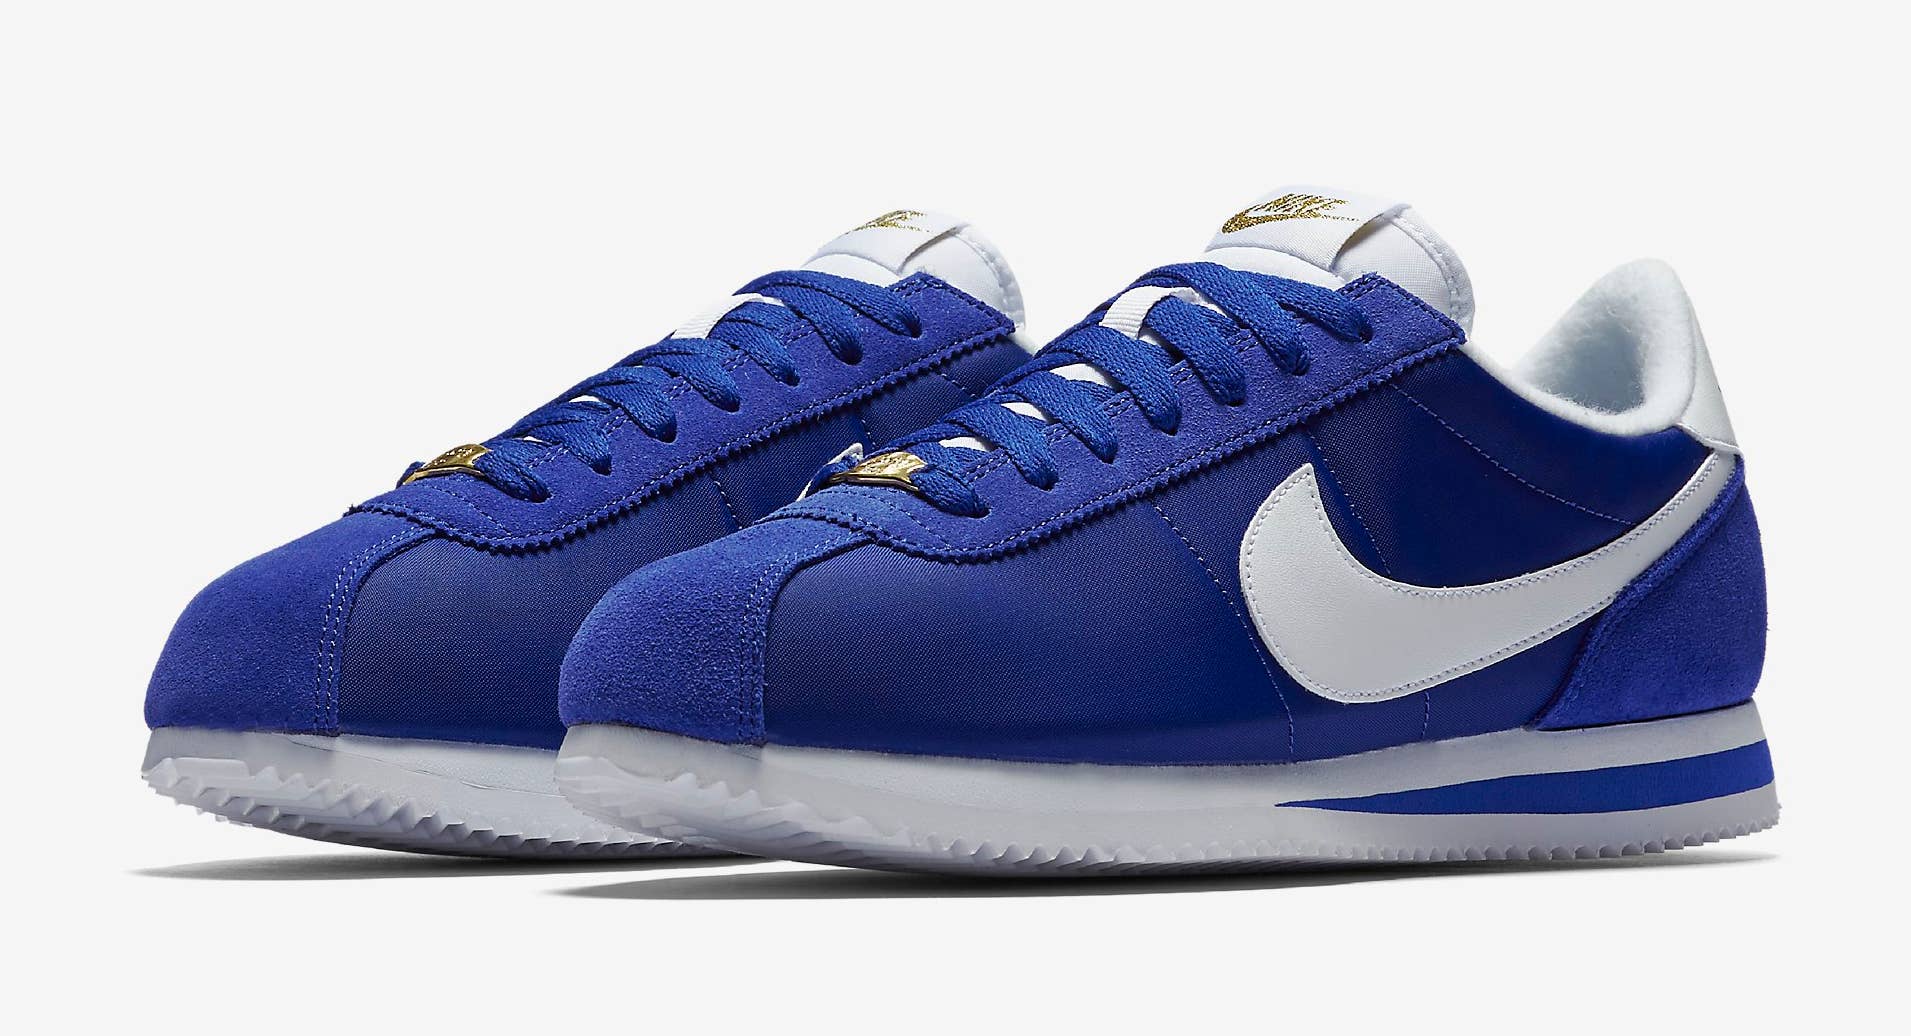 The Nike Cortez Gets Aired Out